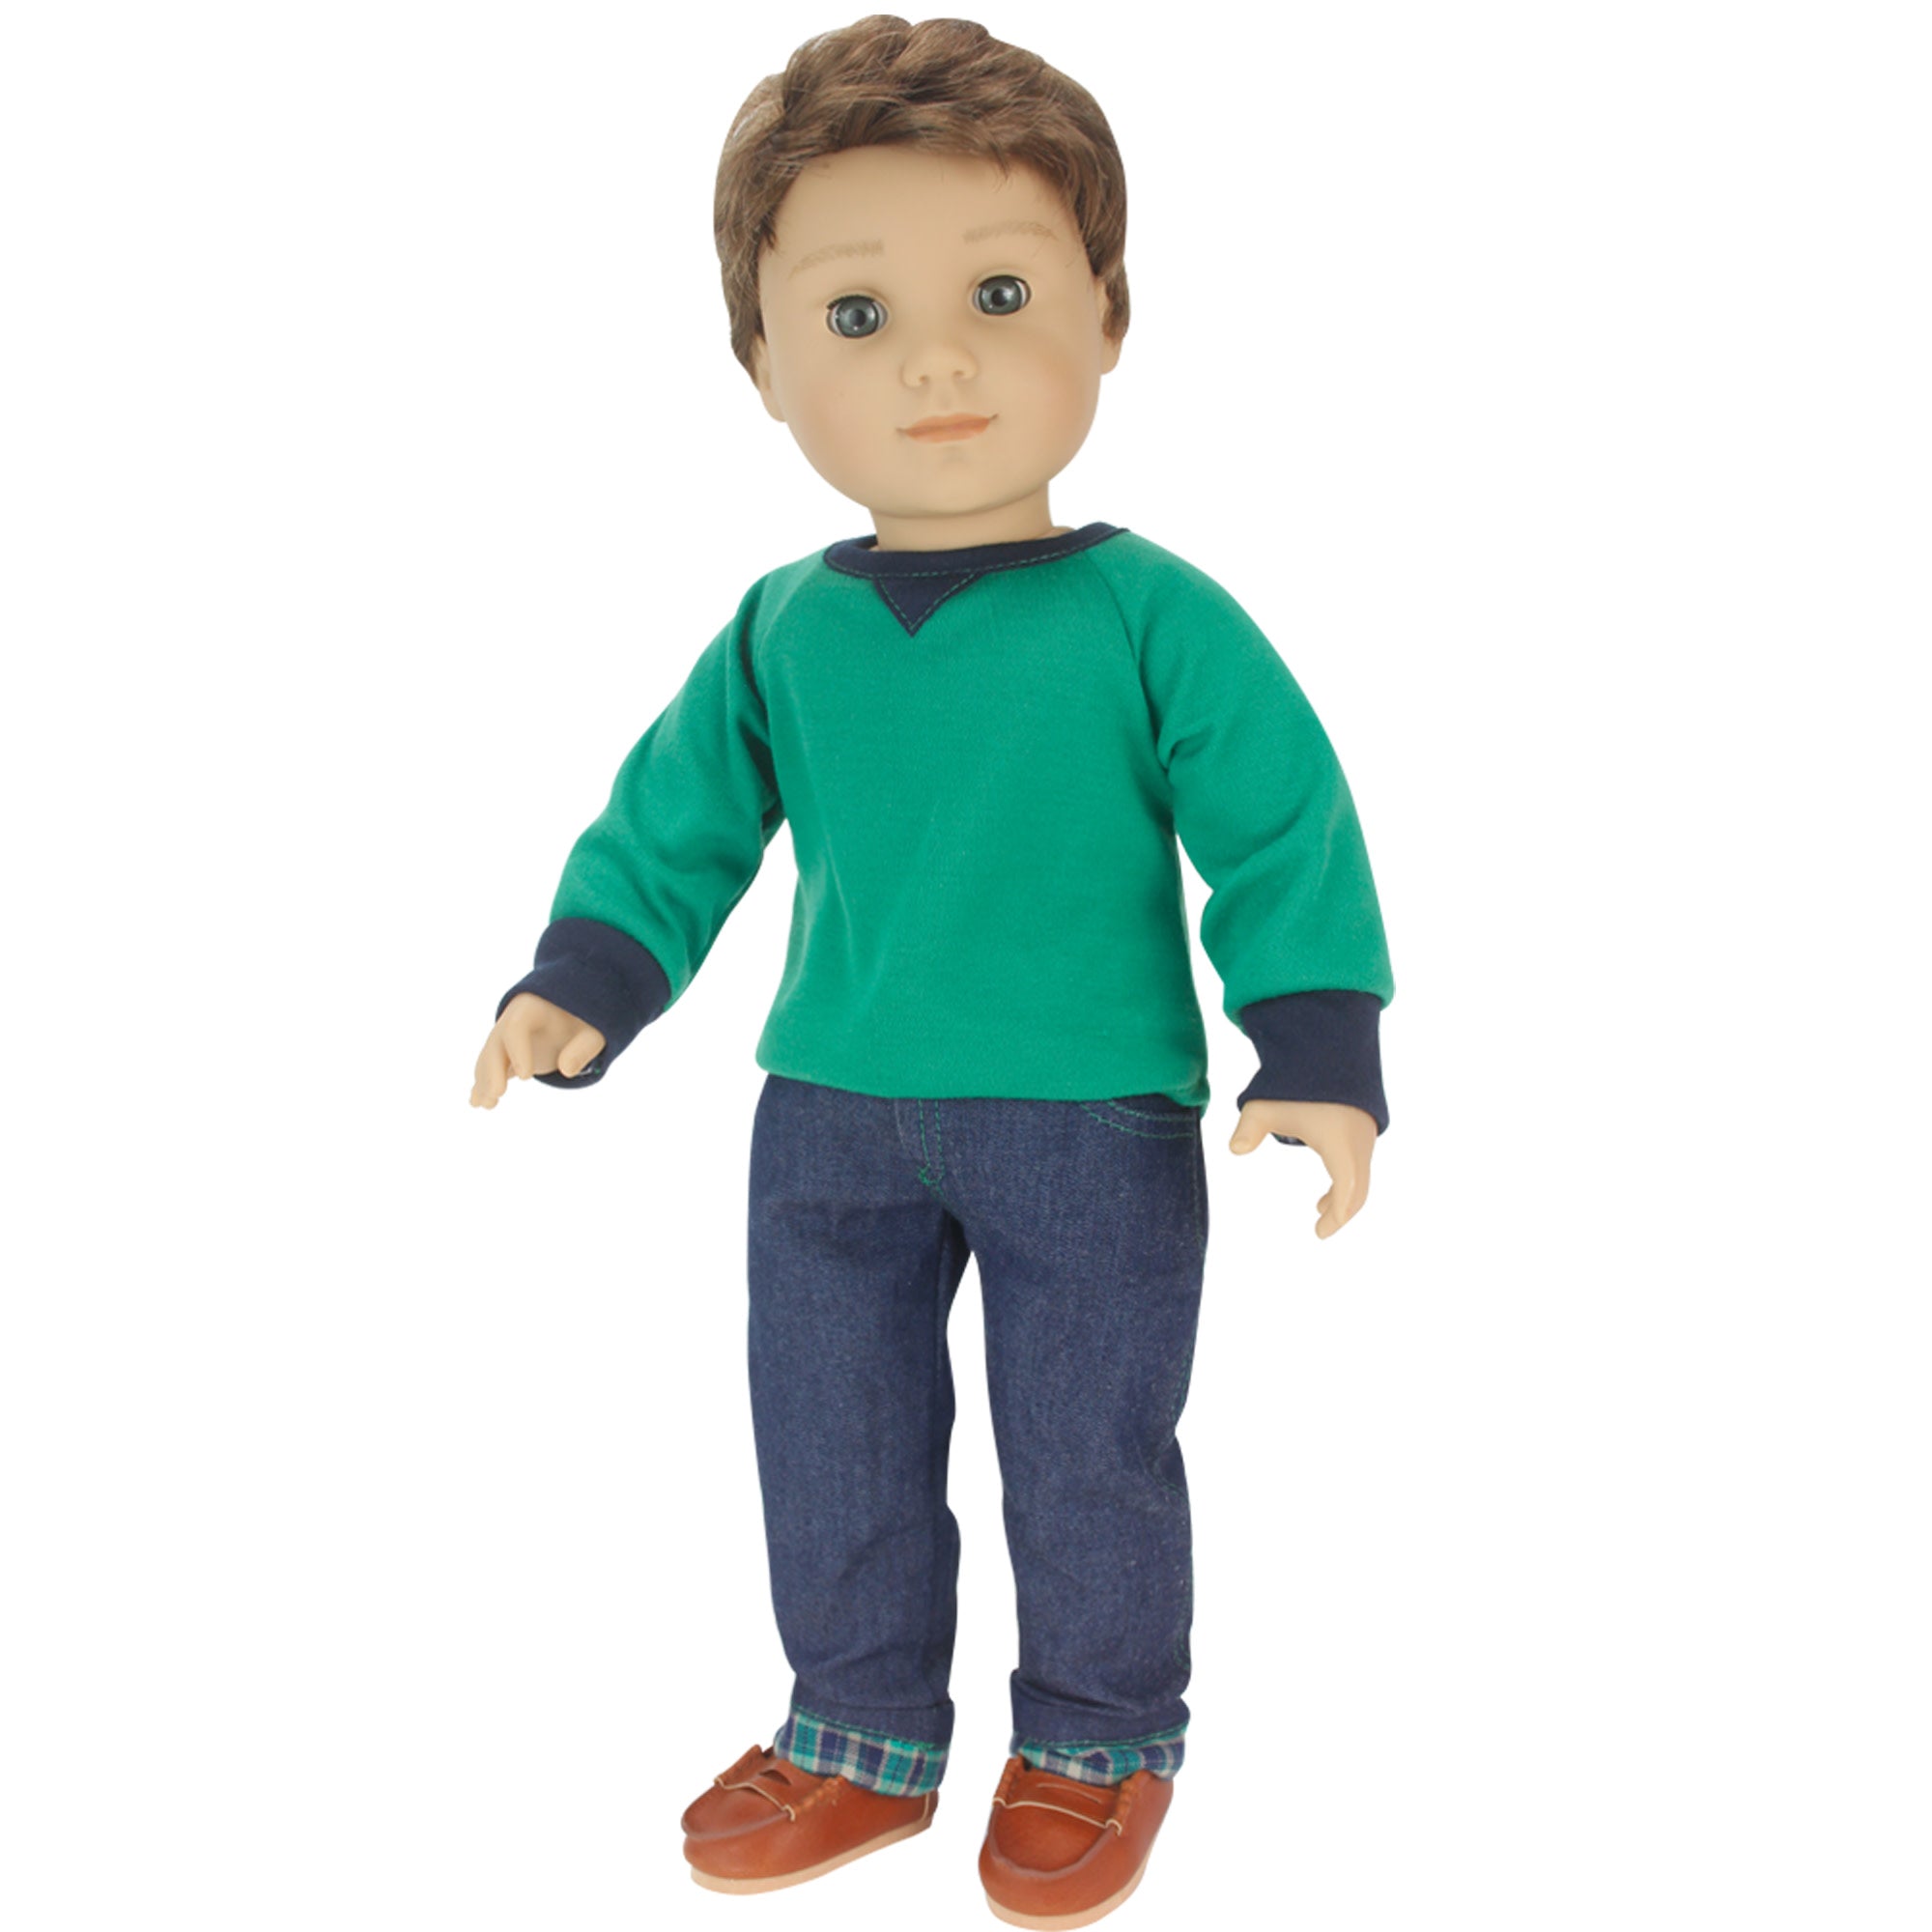 Sophia’s Shirt, Jeans, and Penny Loafers Set for 18" Boy Dolls